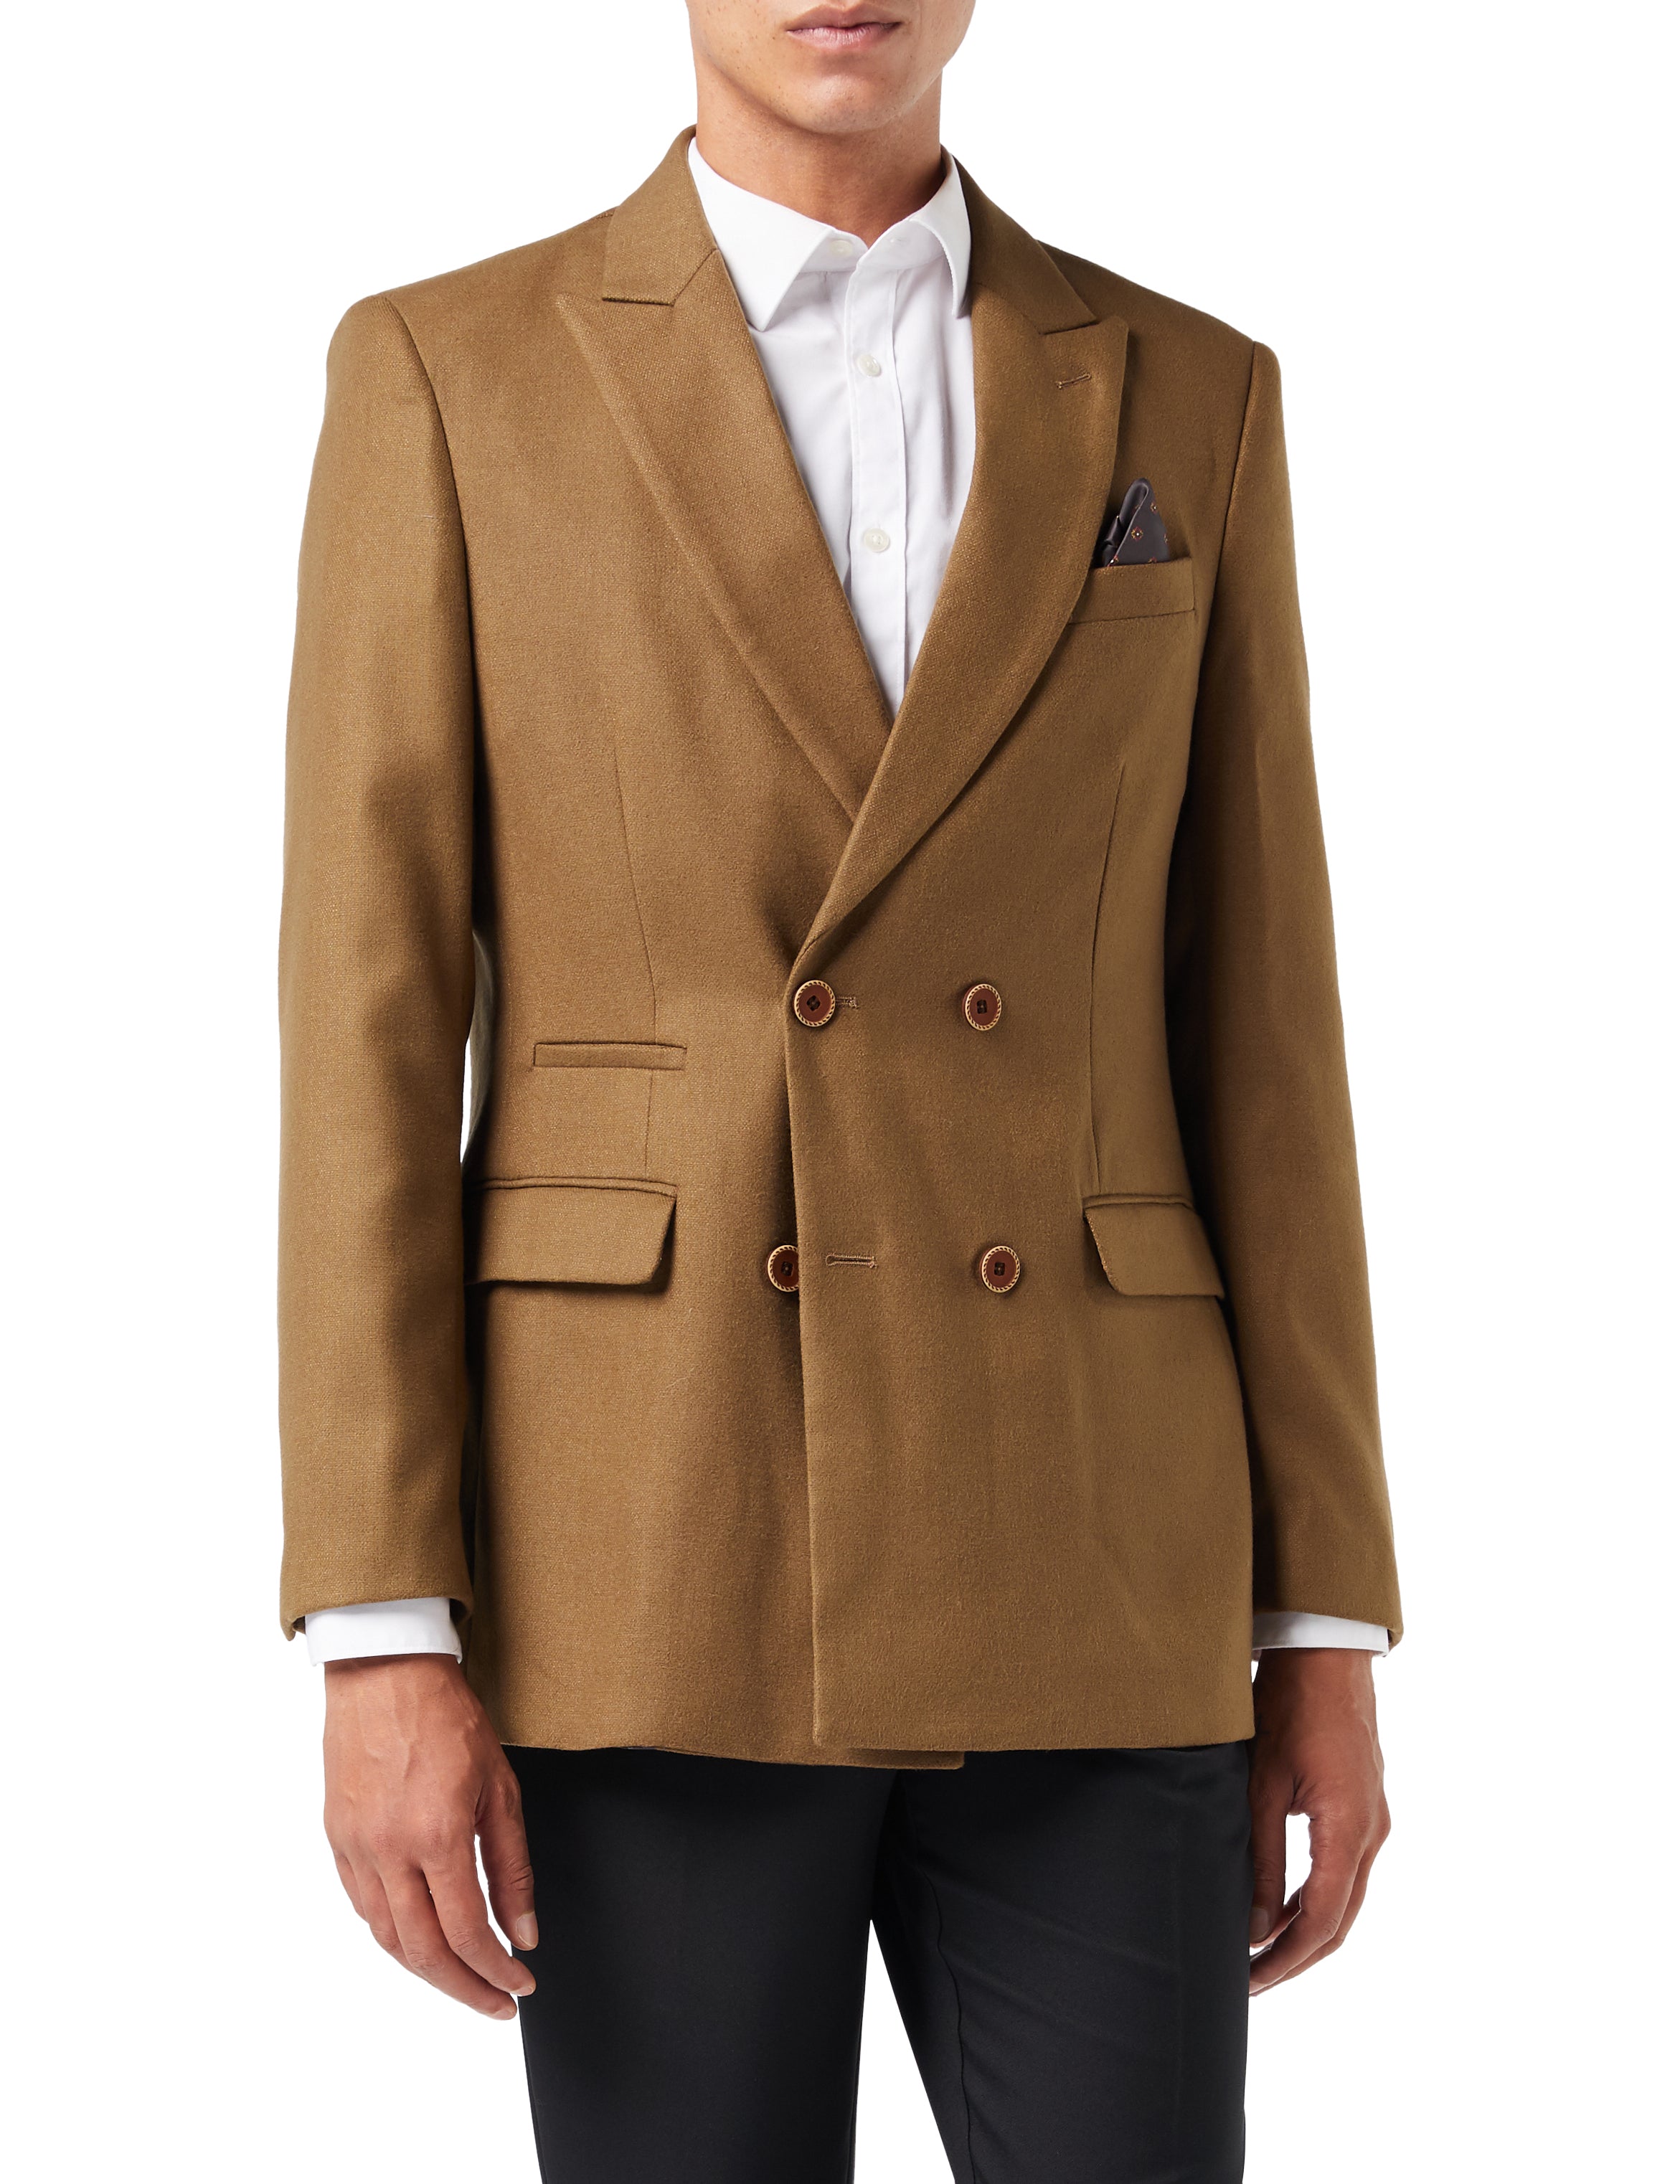 MARCO-DOUBLE BREASTED TWEED TAN JACKET